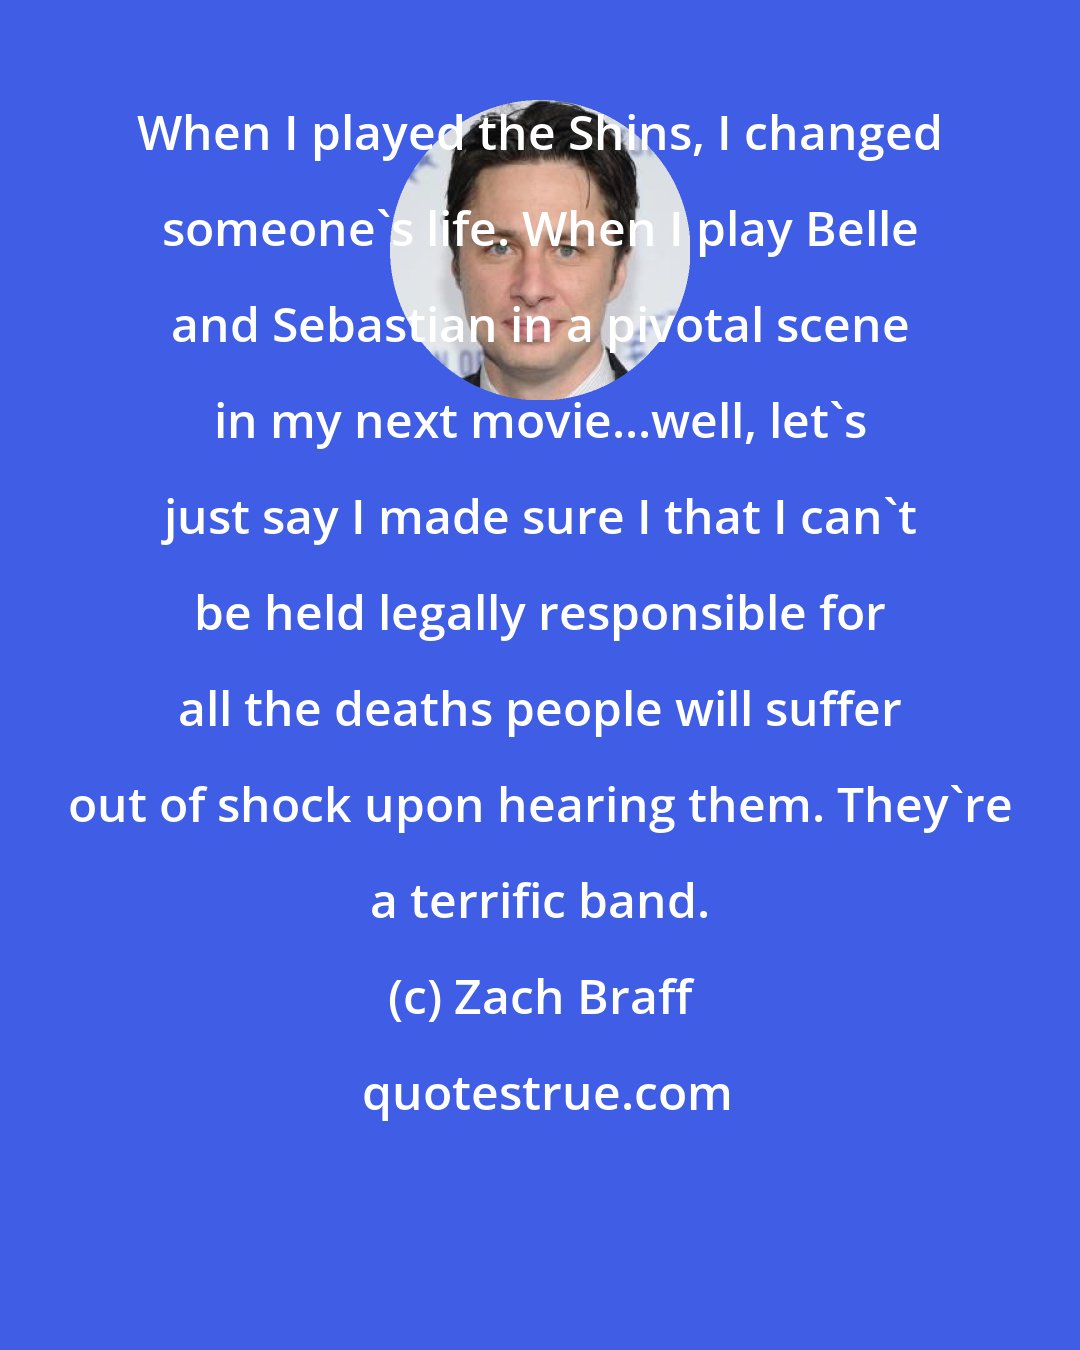 Zach Braff: When I played the Shins, I changed someone's life. When I play Belle and Sebastian in a pivotal scene in my next movie...well, let's just say I made sure I that I can't be held legally responsible for all the deaths people will suffer out of shock upon hearing them. They're a terrific band.